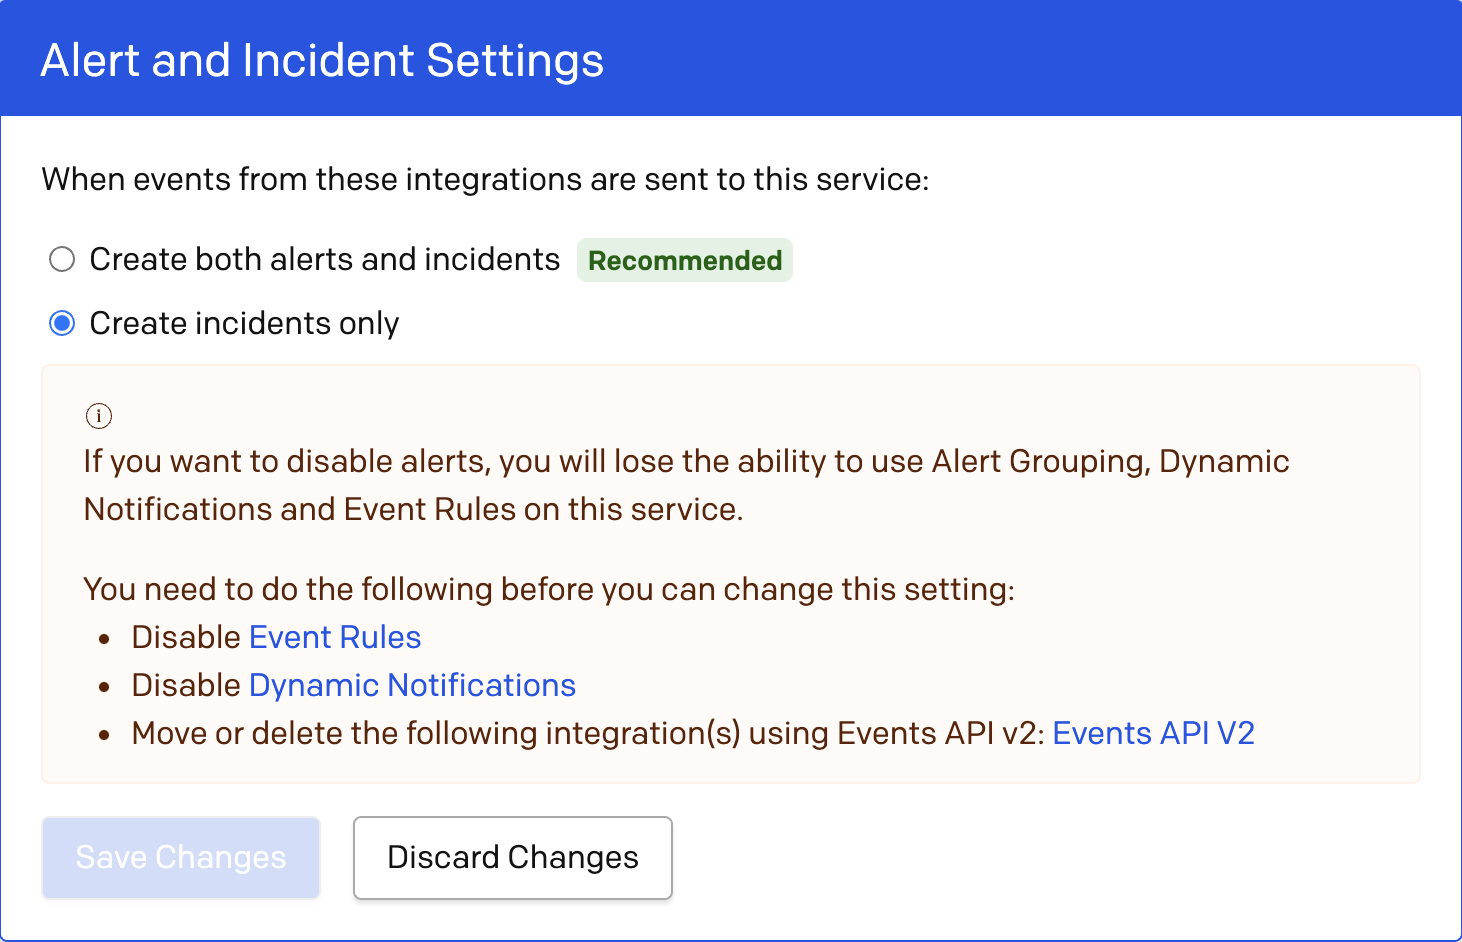 Alert and Incident Settings